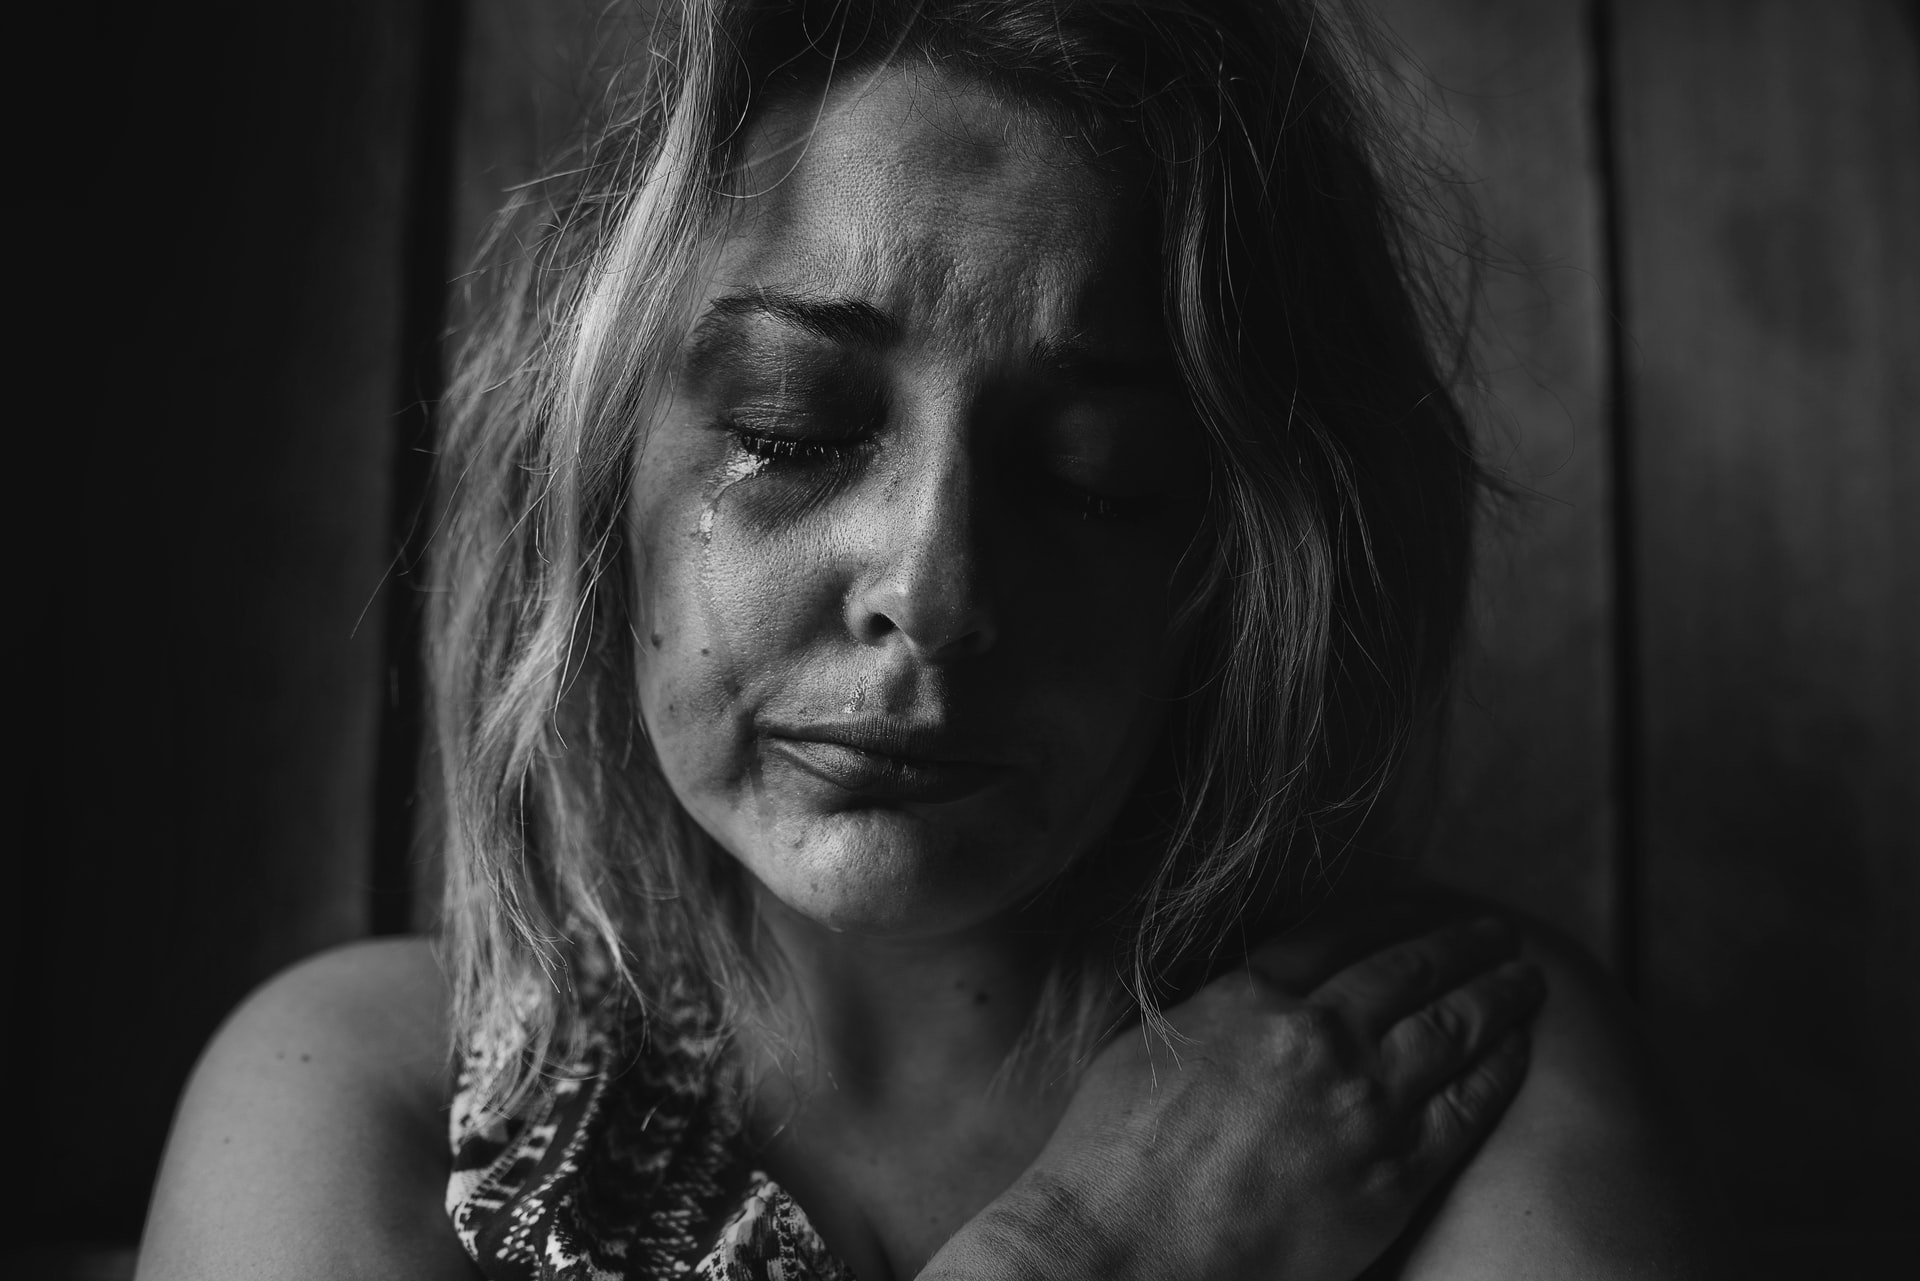 His wife broke in tears upon confrontation | Source: Unsplash